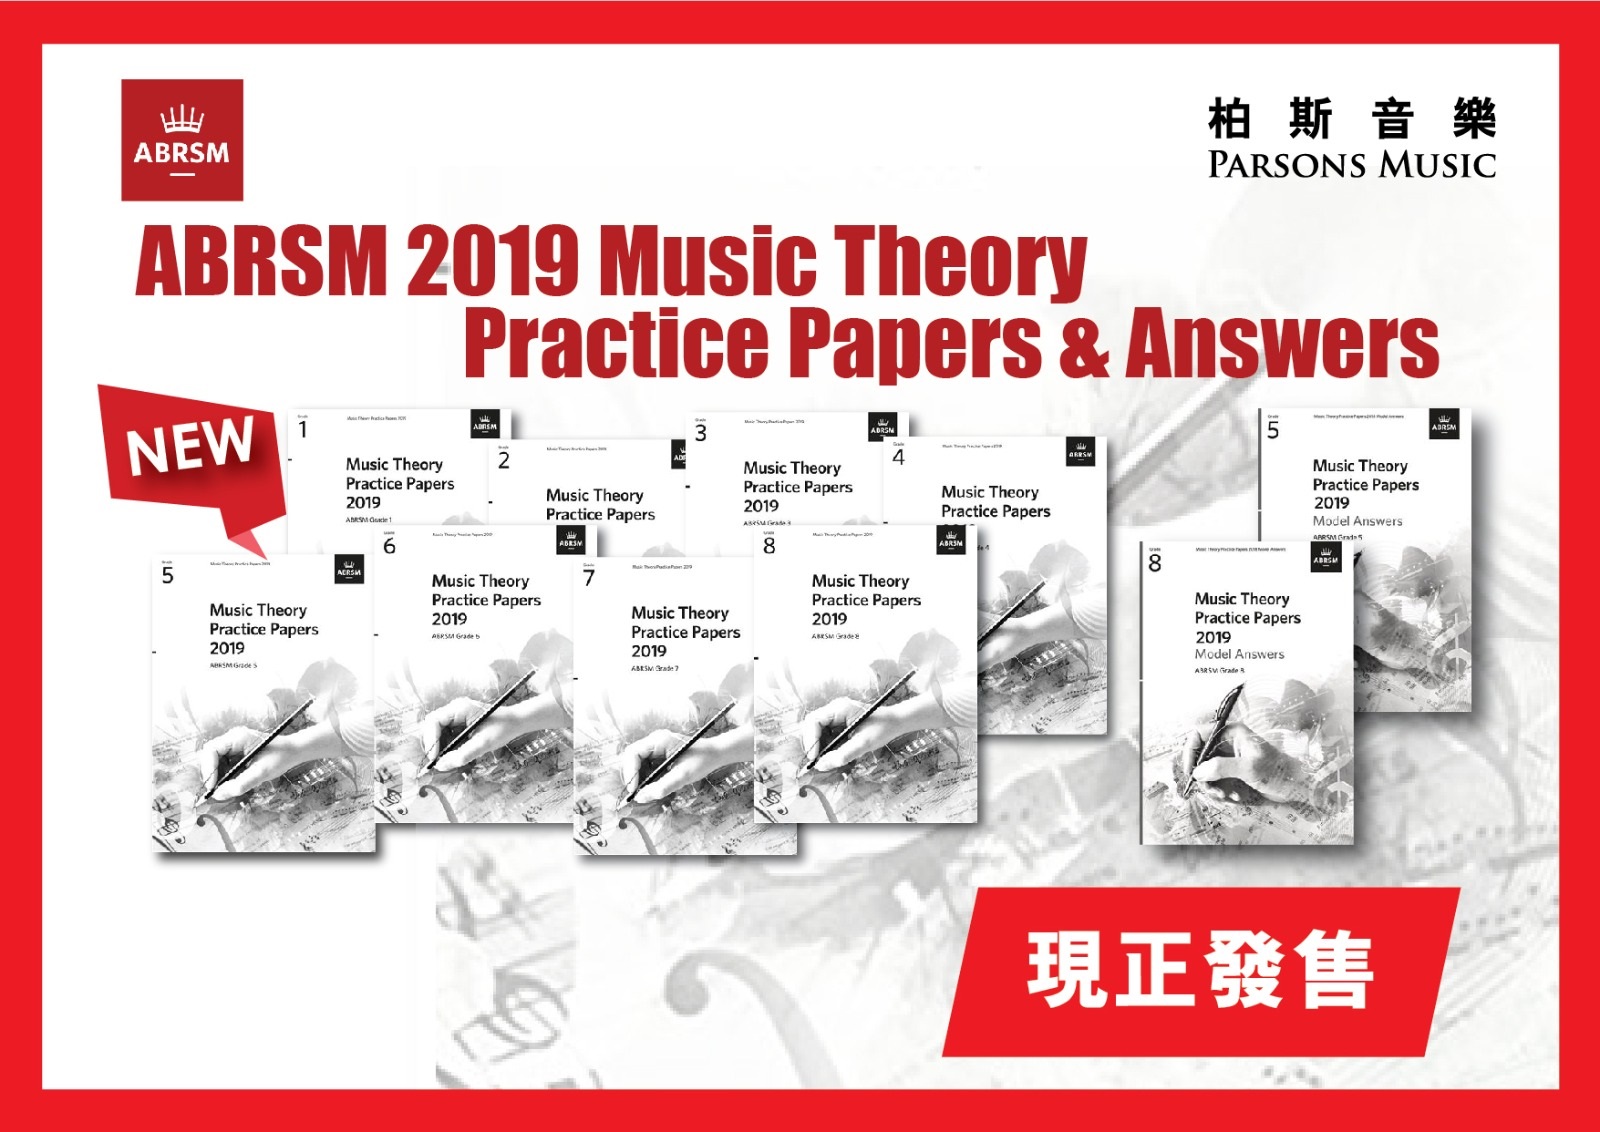 ABRSM 2019 Music Theory Practice Papers & Answers  現正發售！